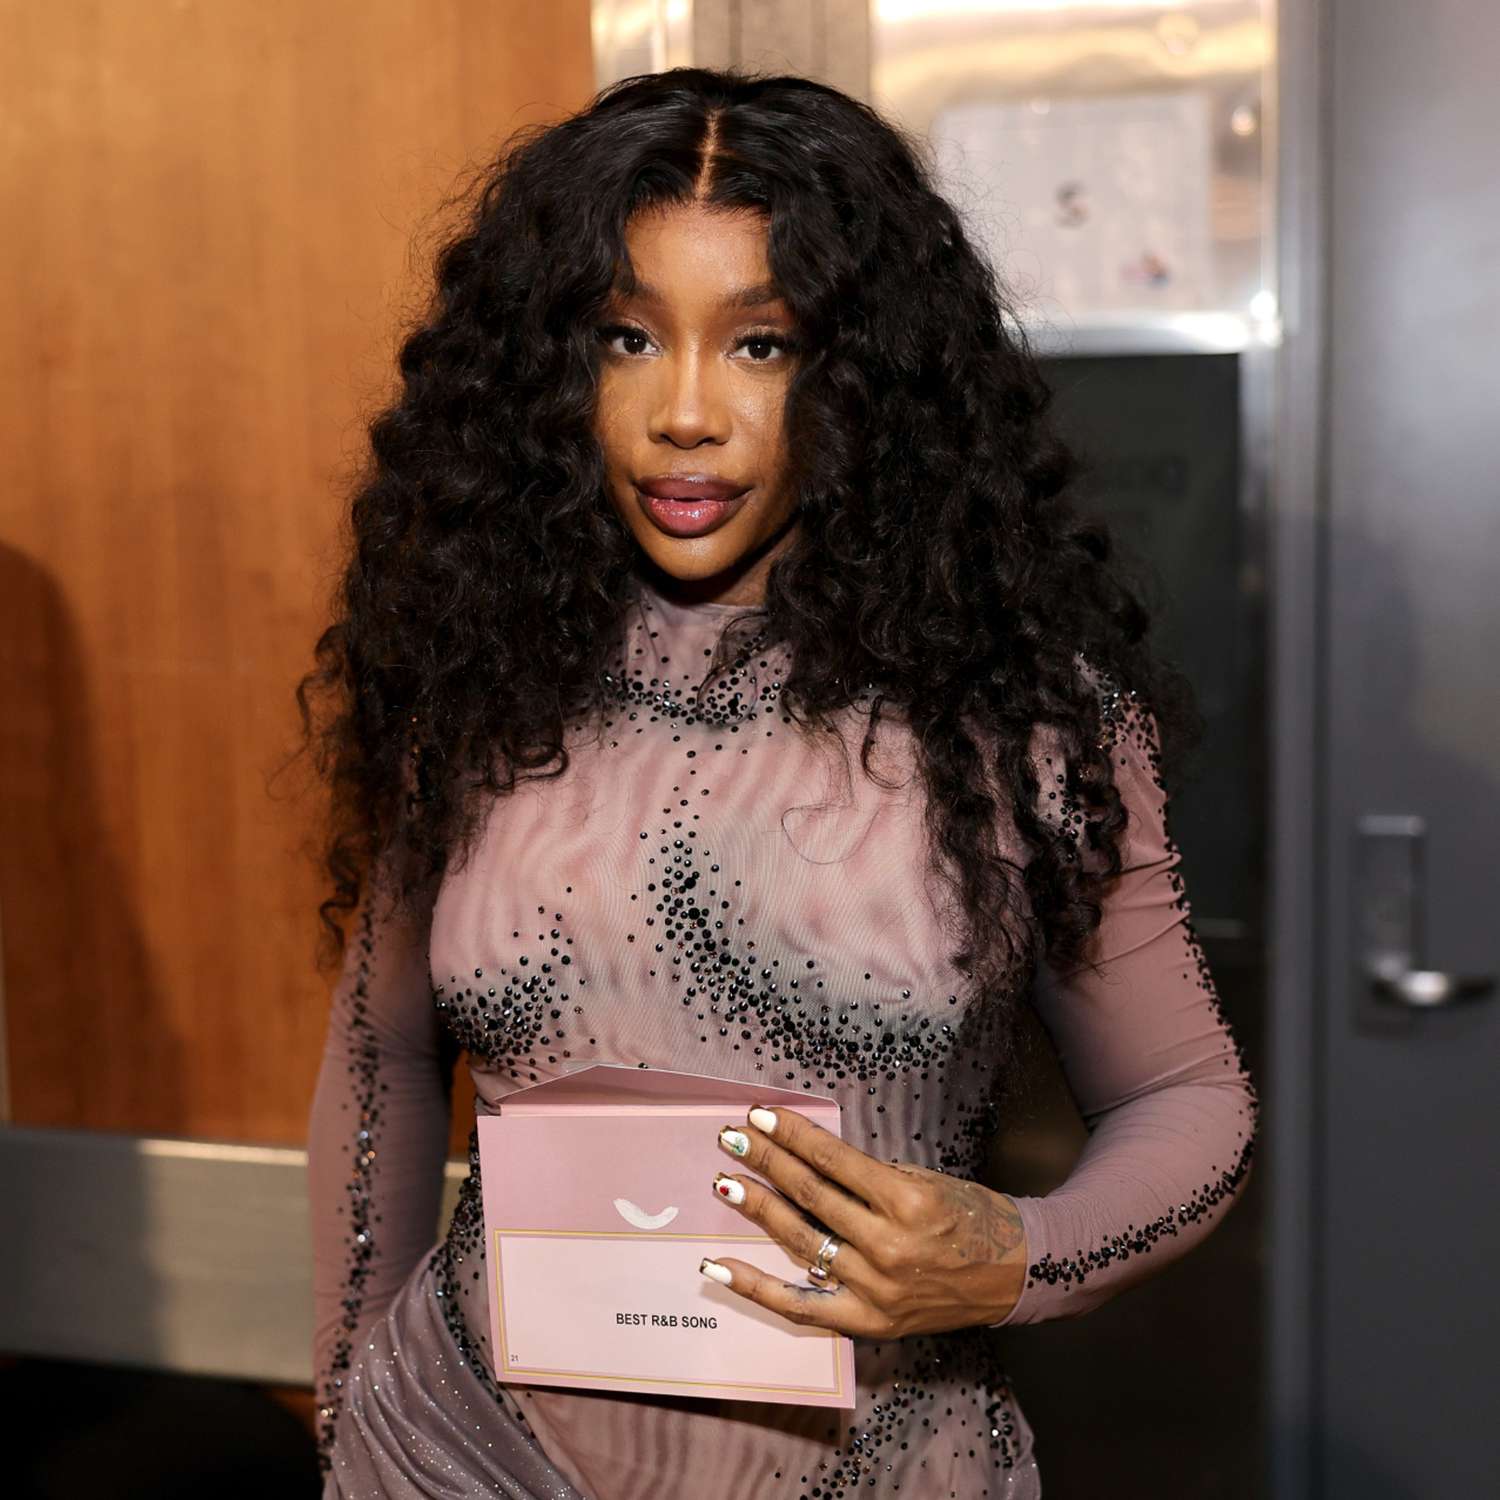 SZA with a center-parted curly hairstyle